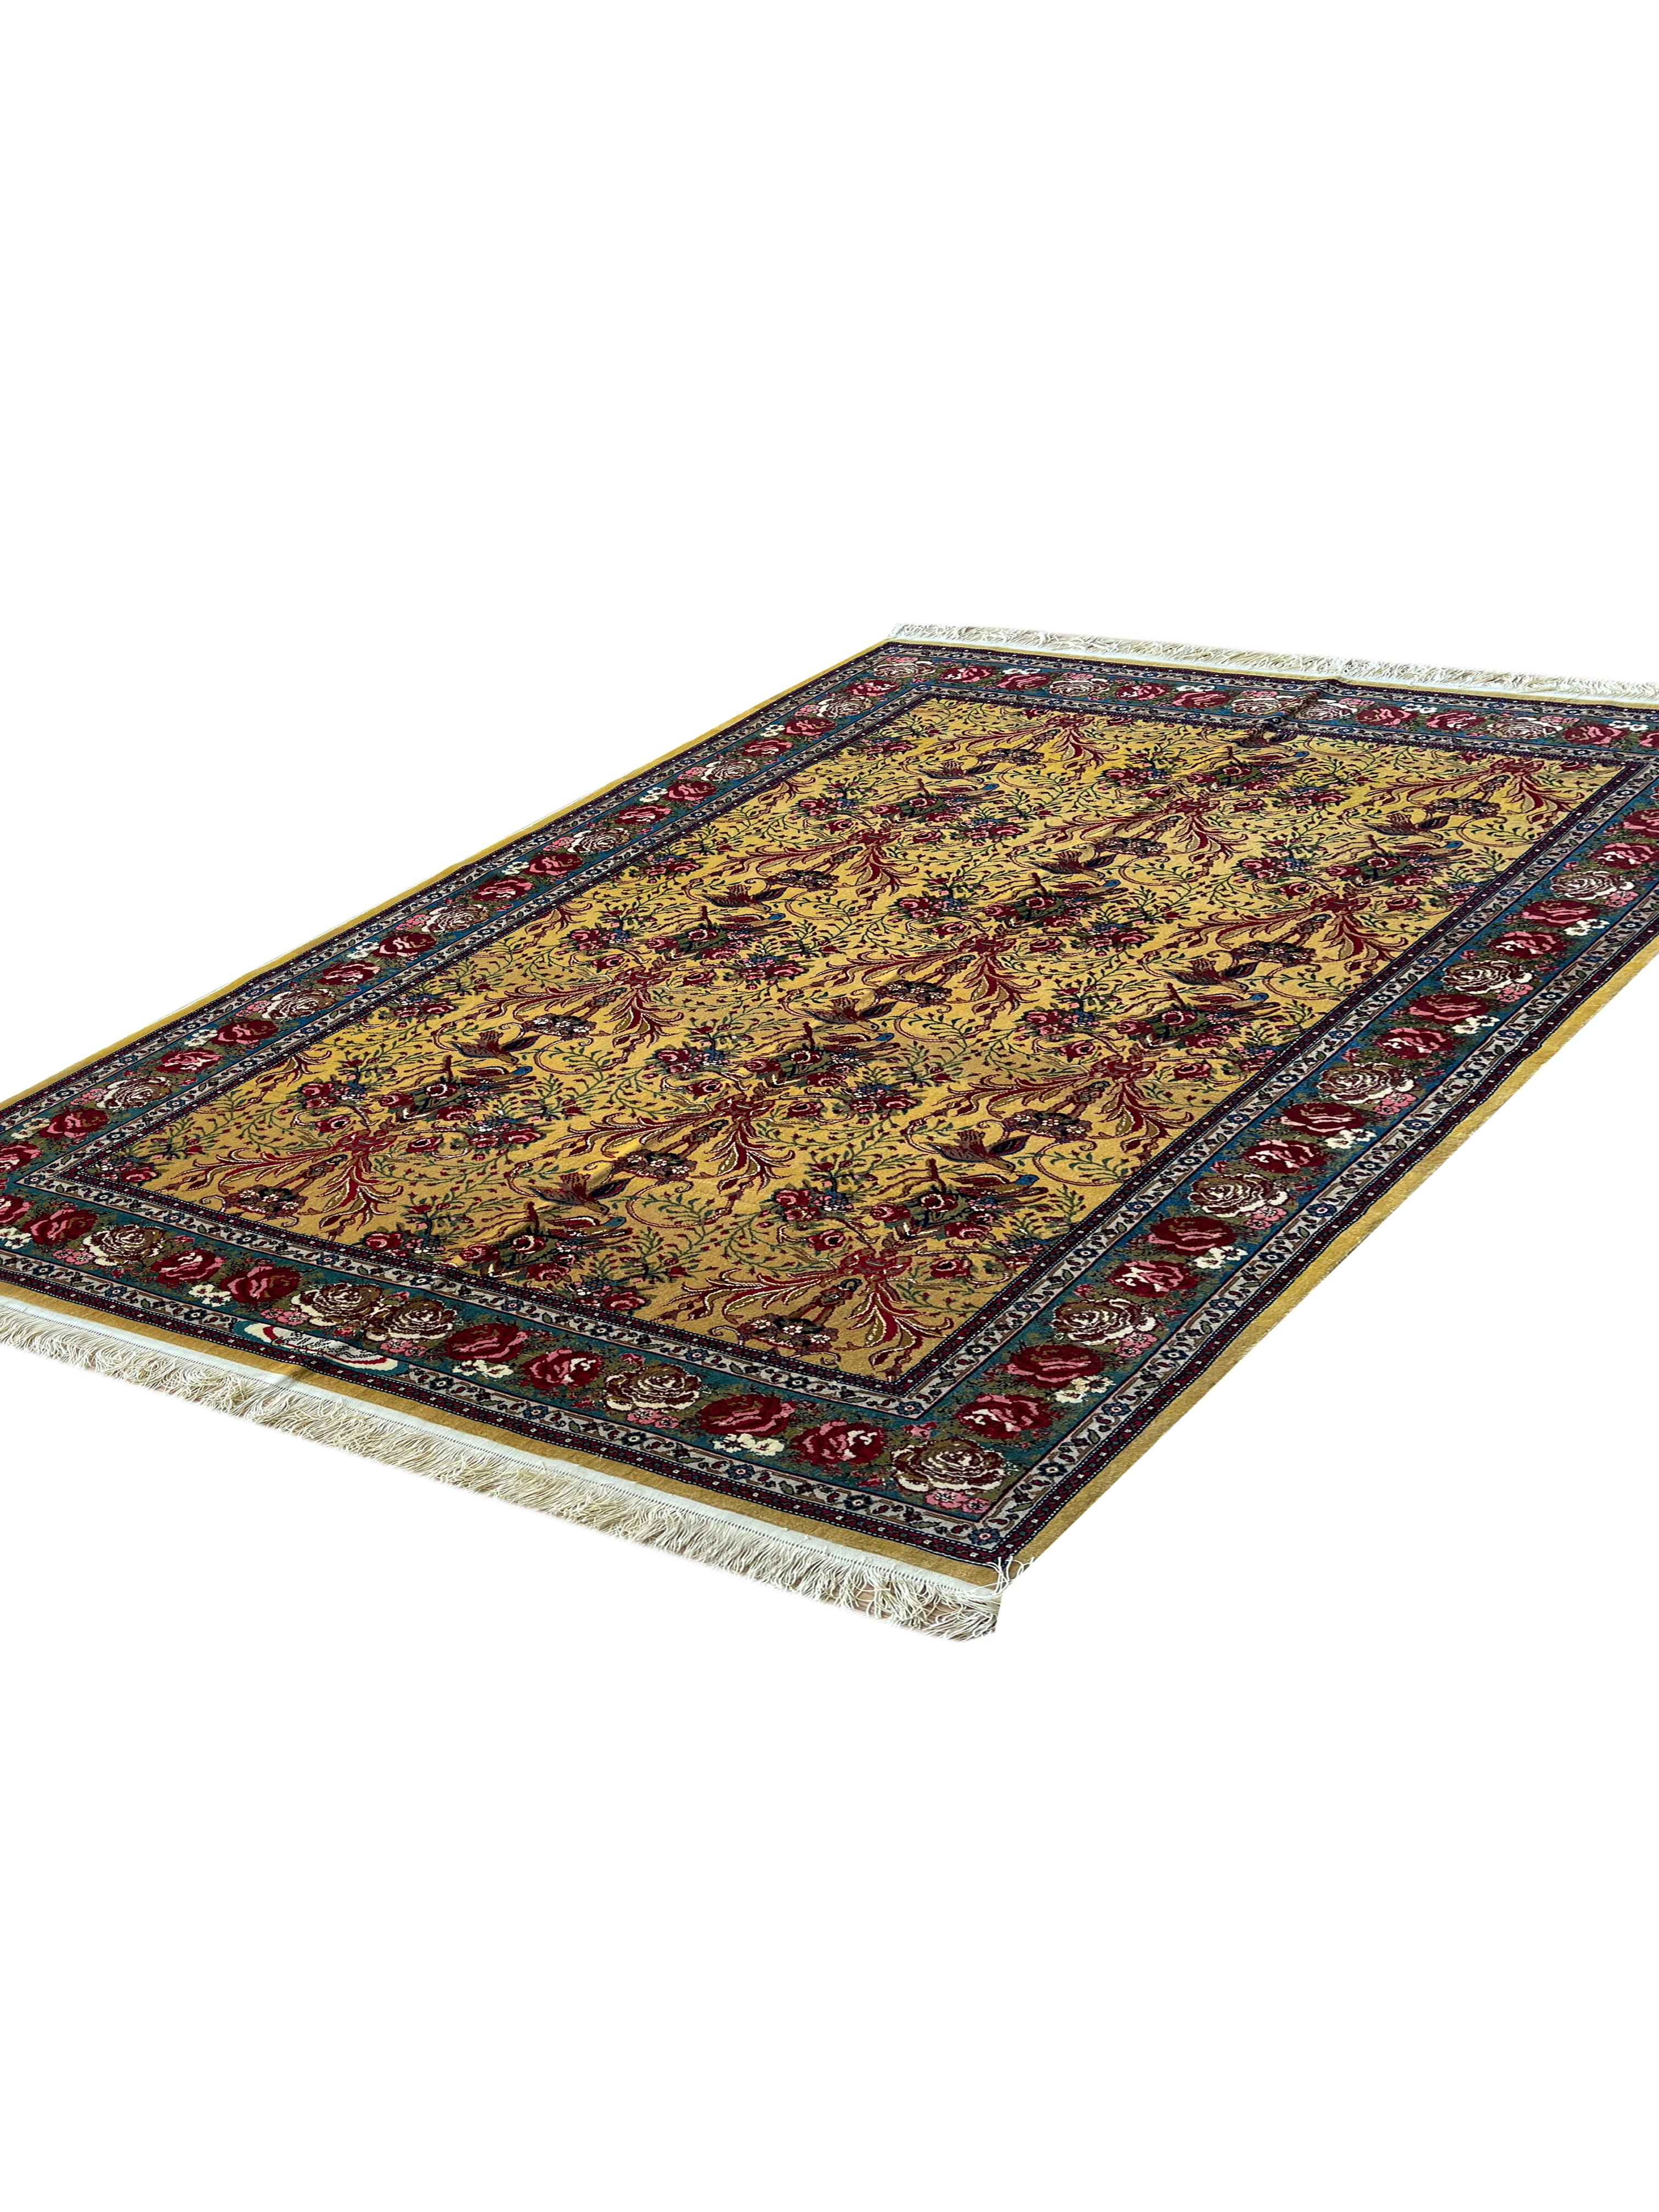 Outstanding Rug, All Over Paradise Carpet, Handwoven Gold Rug In Excellent Condition For Sale In Hampshire, GB